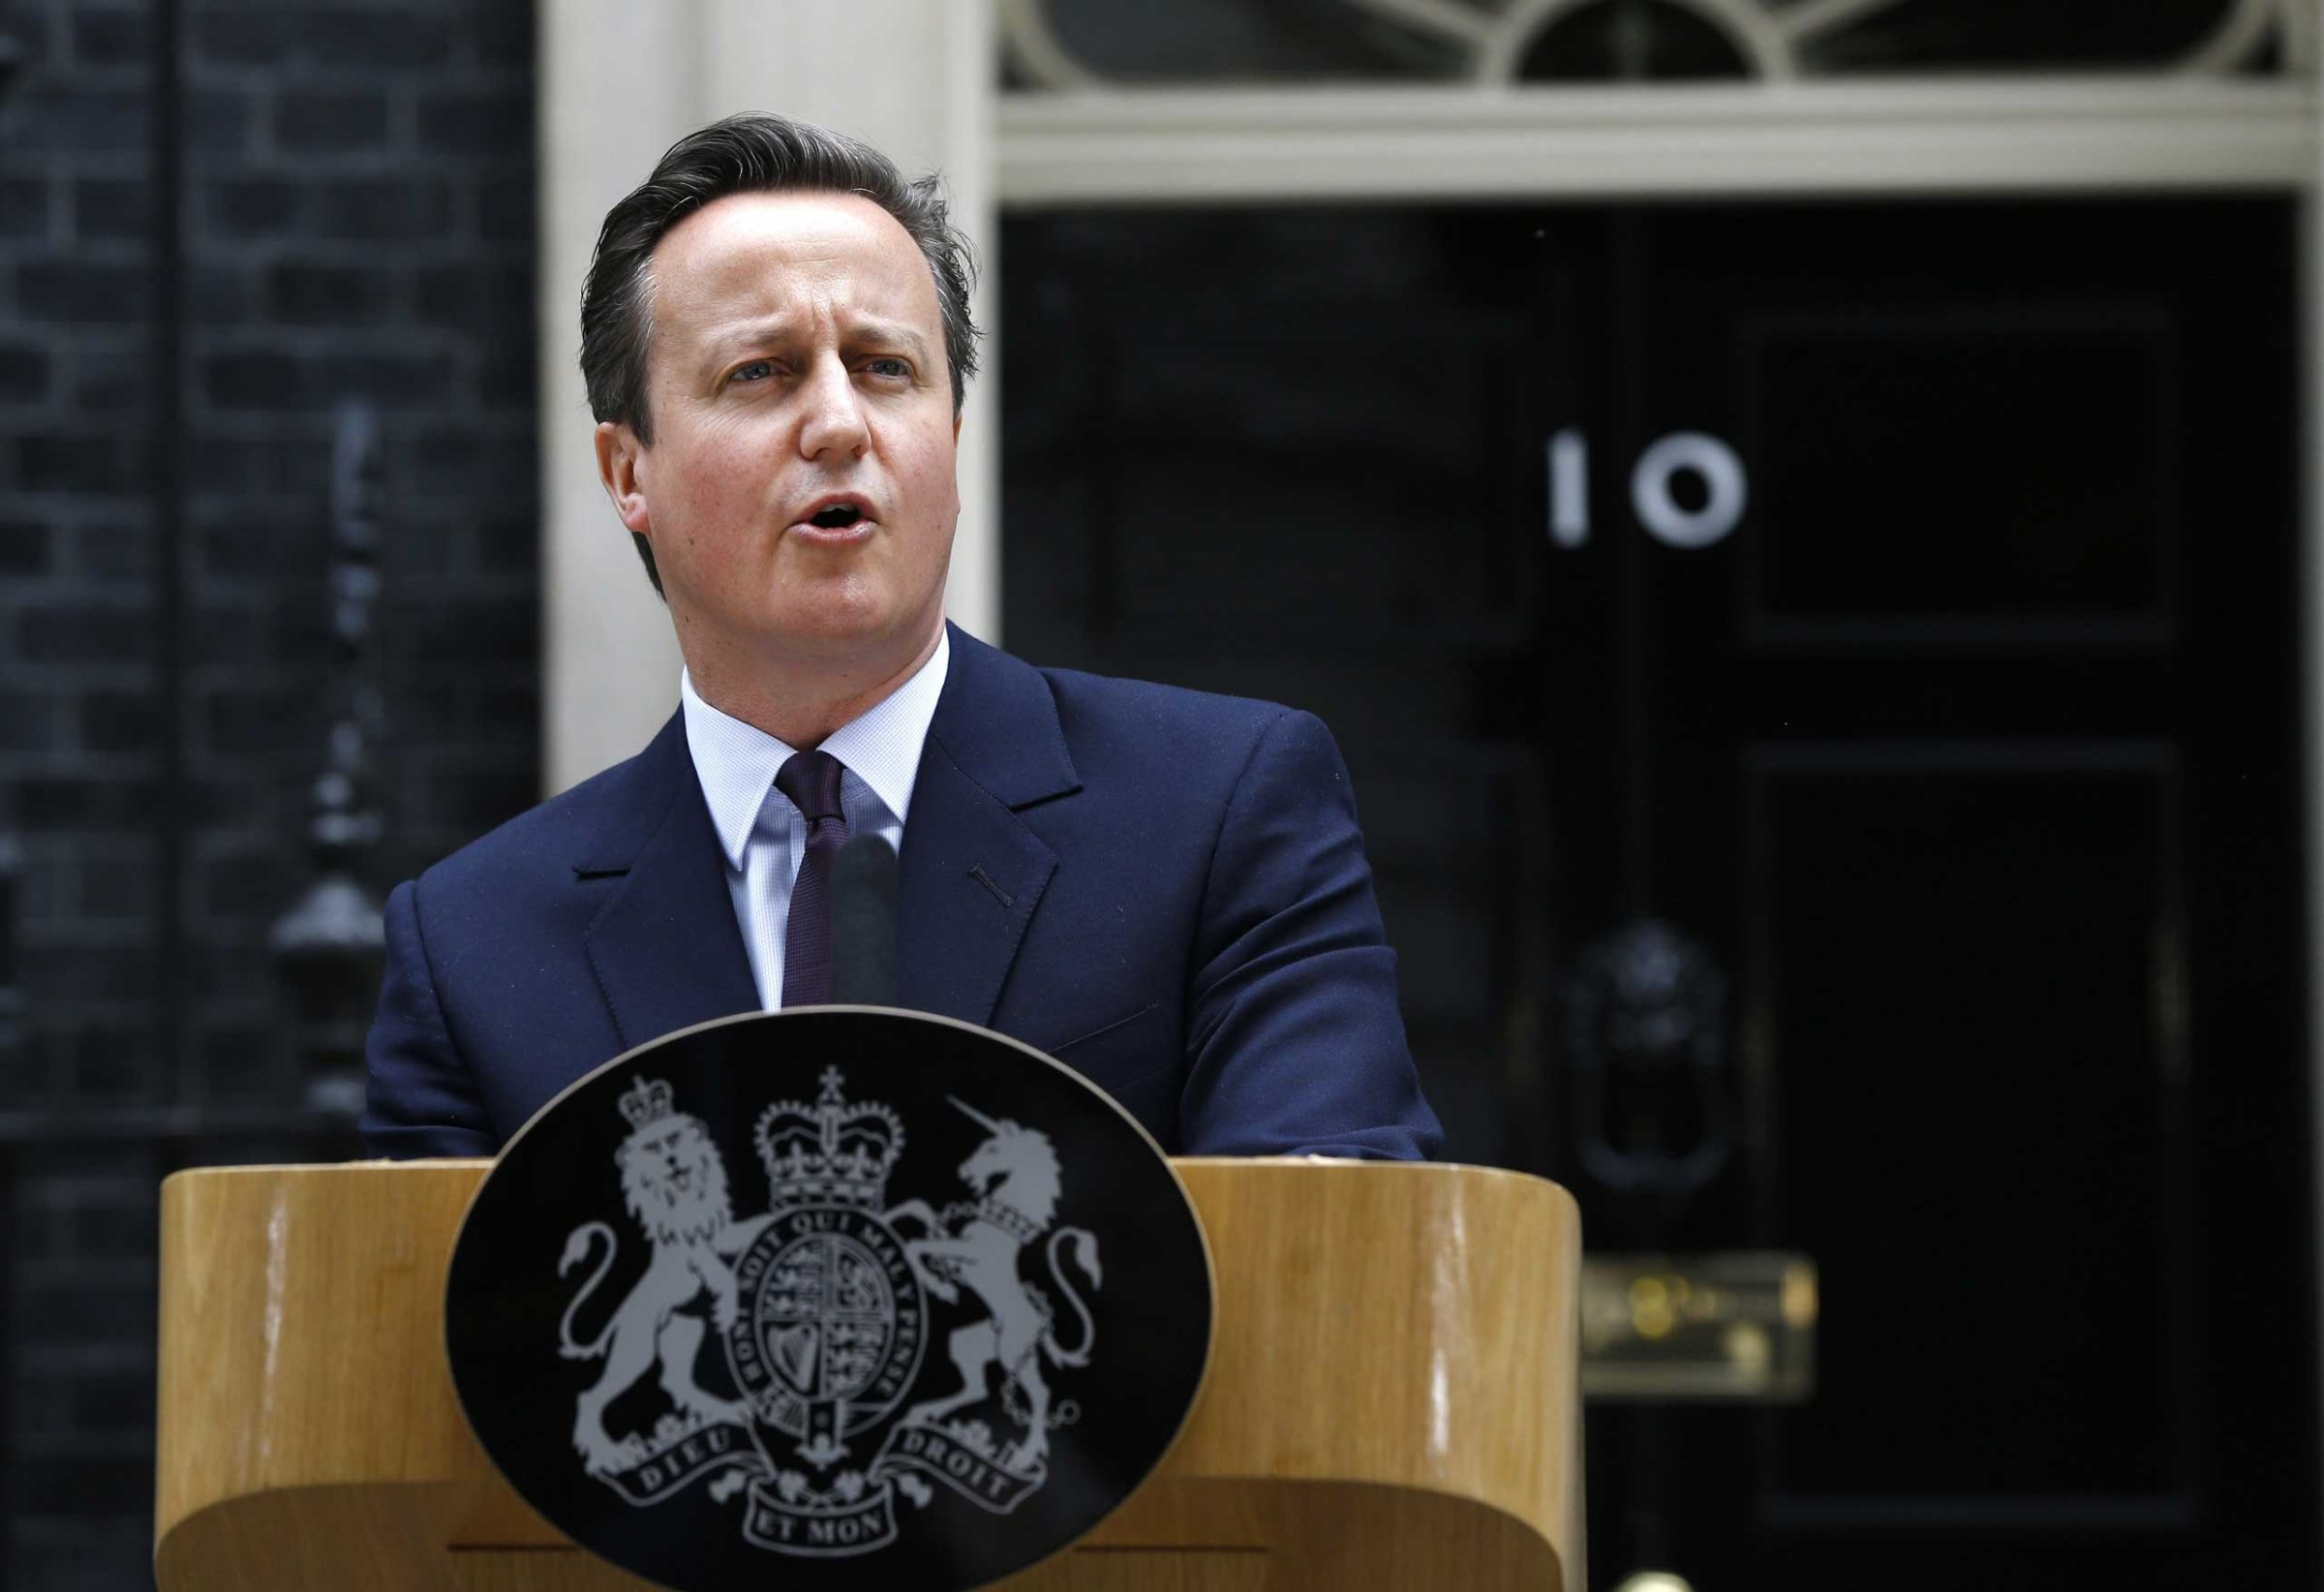 Britain's Prime Minister David Cameron speaks to the media at 10 Downing Street in London on May 8, 2015.